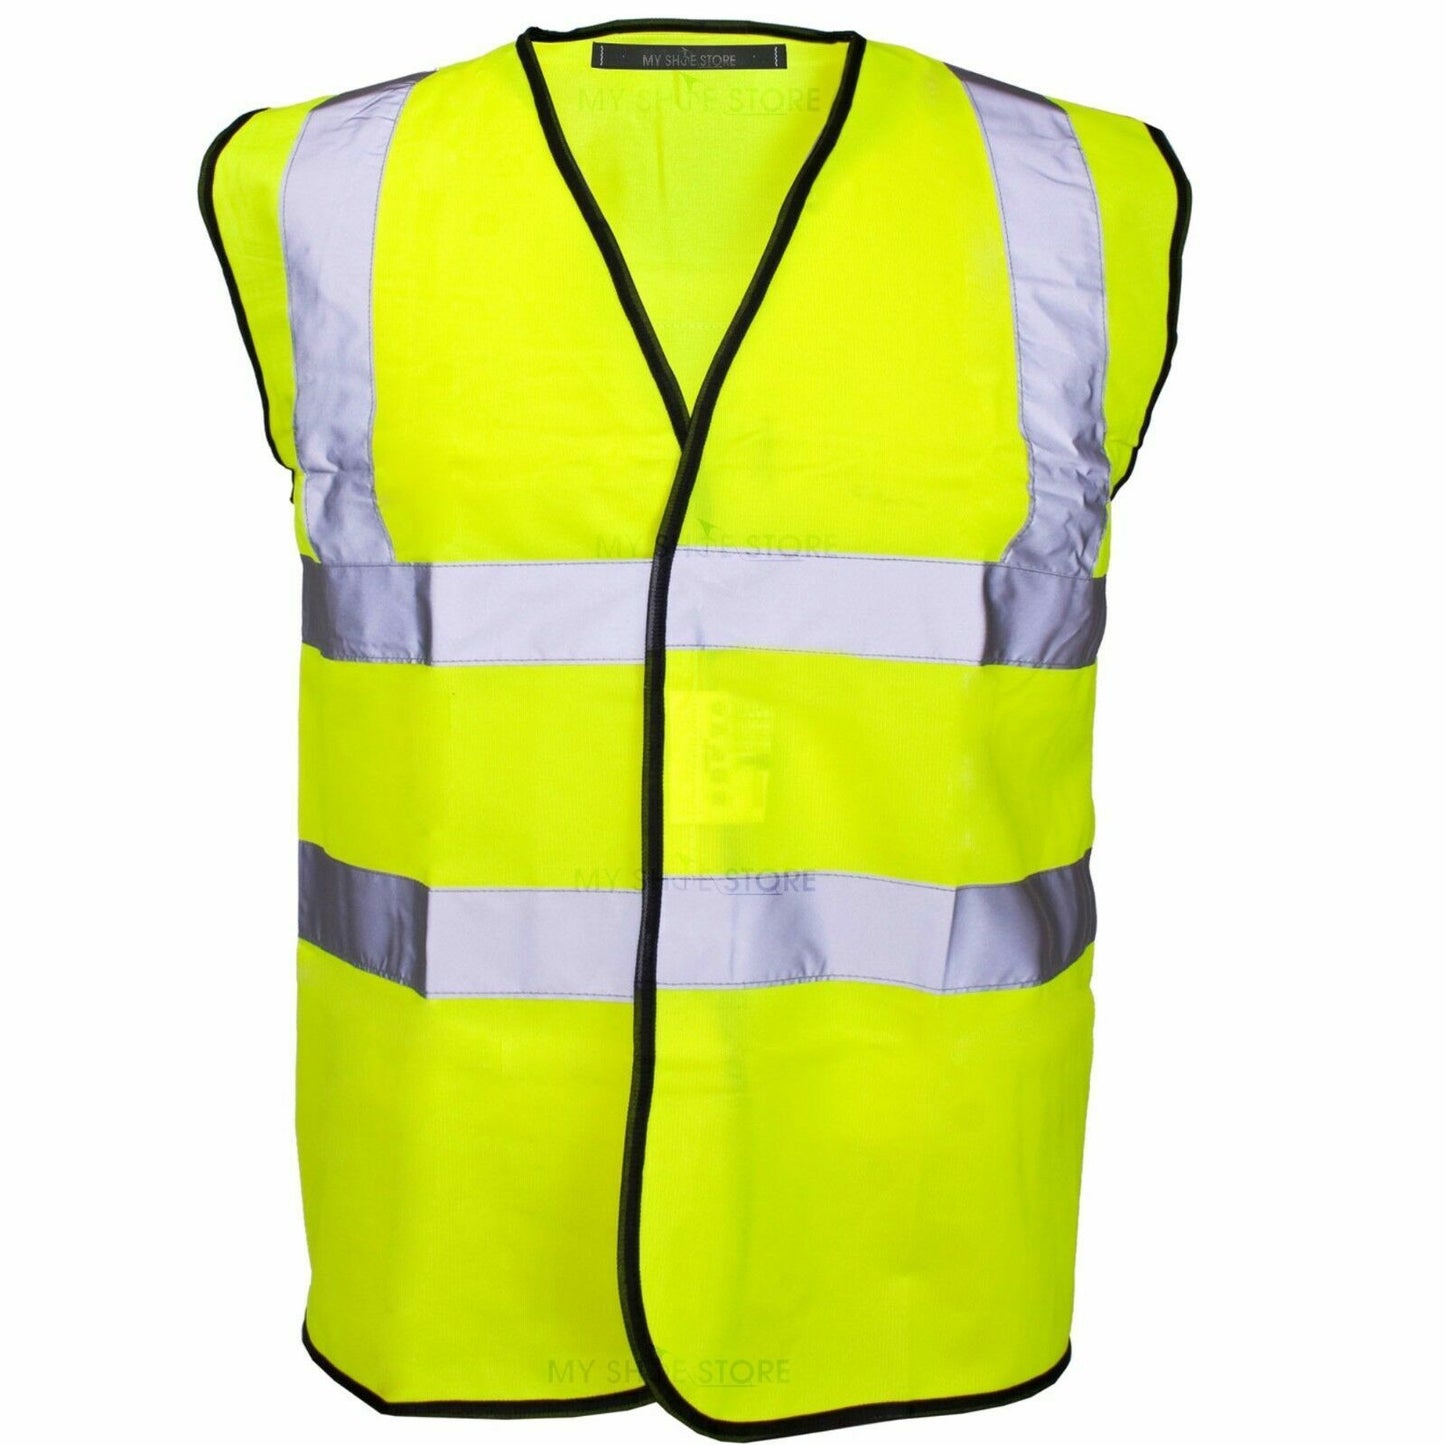 2 PACK HI VIS VEST VISIBILITY SECURITY WORK CONTRACTOR SAFETY WAISTCOAT JACKET